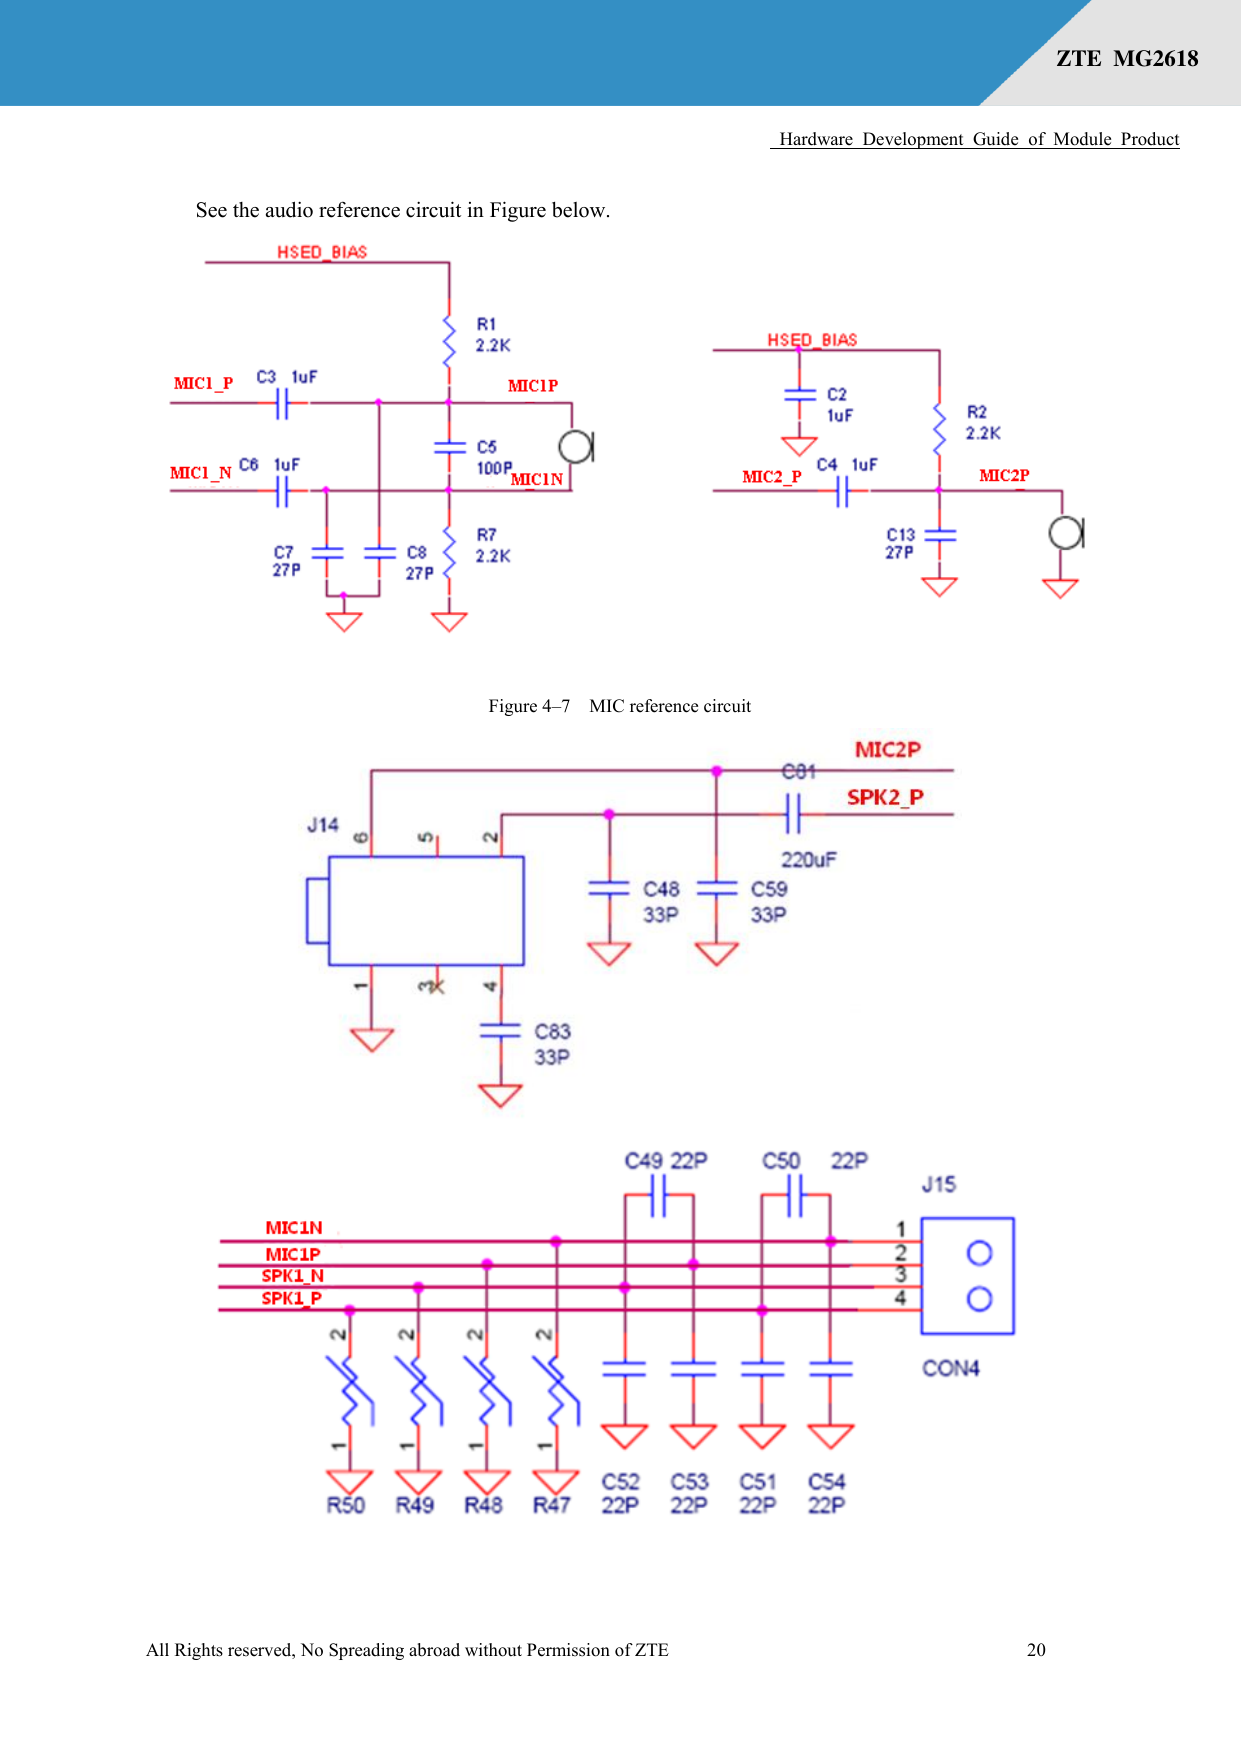      Hardware  Development  Guide  of  Module  Product  All Rights reserved, No Spreading abroad without Permission of ZTE              20 ZTE  MG2618   See the audio reference circuit in Figure below.  Figure 4–7  MIC reference circuit   